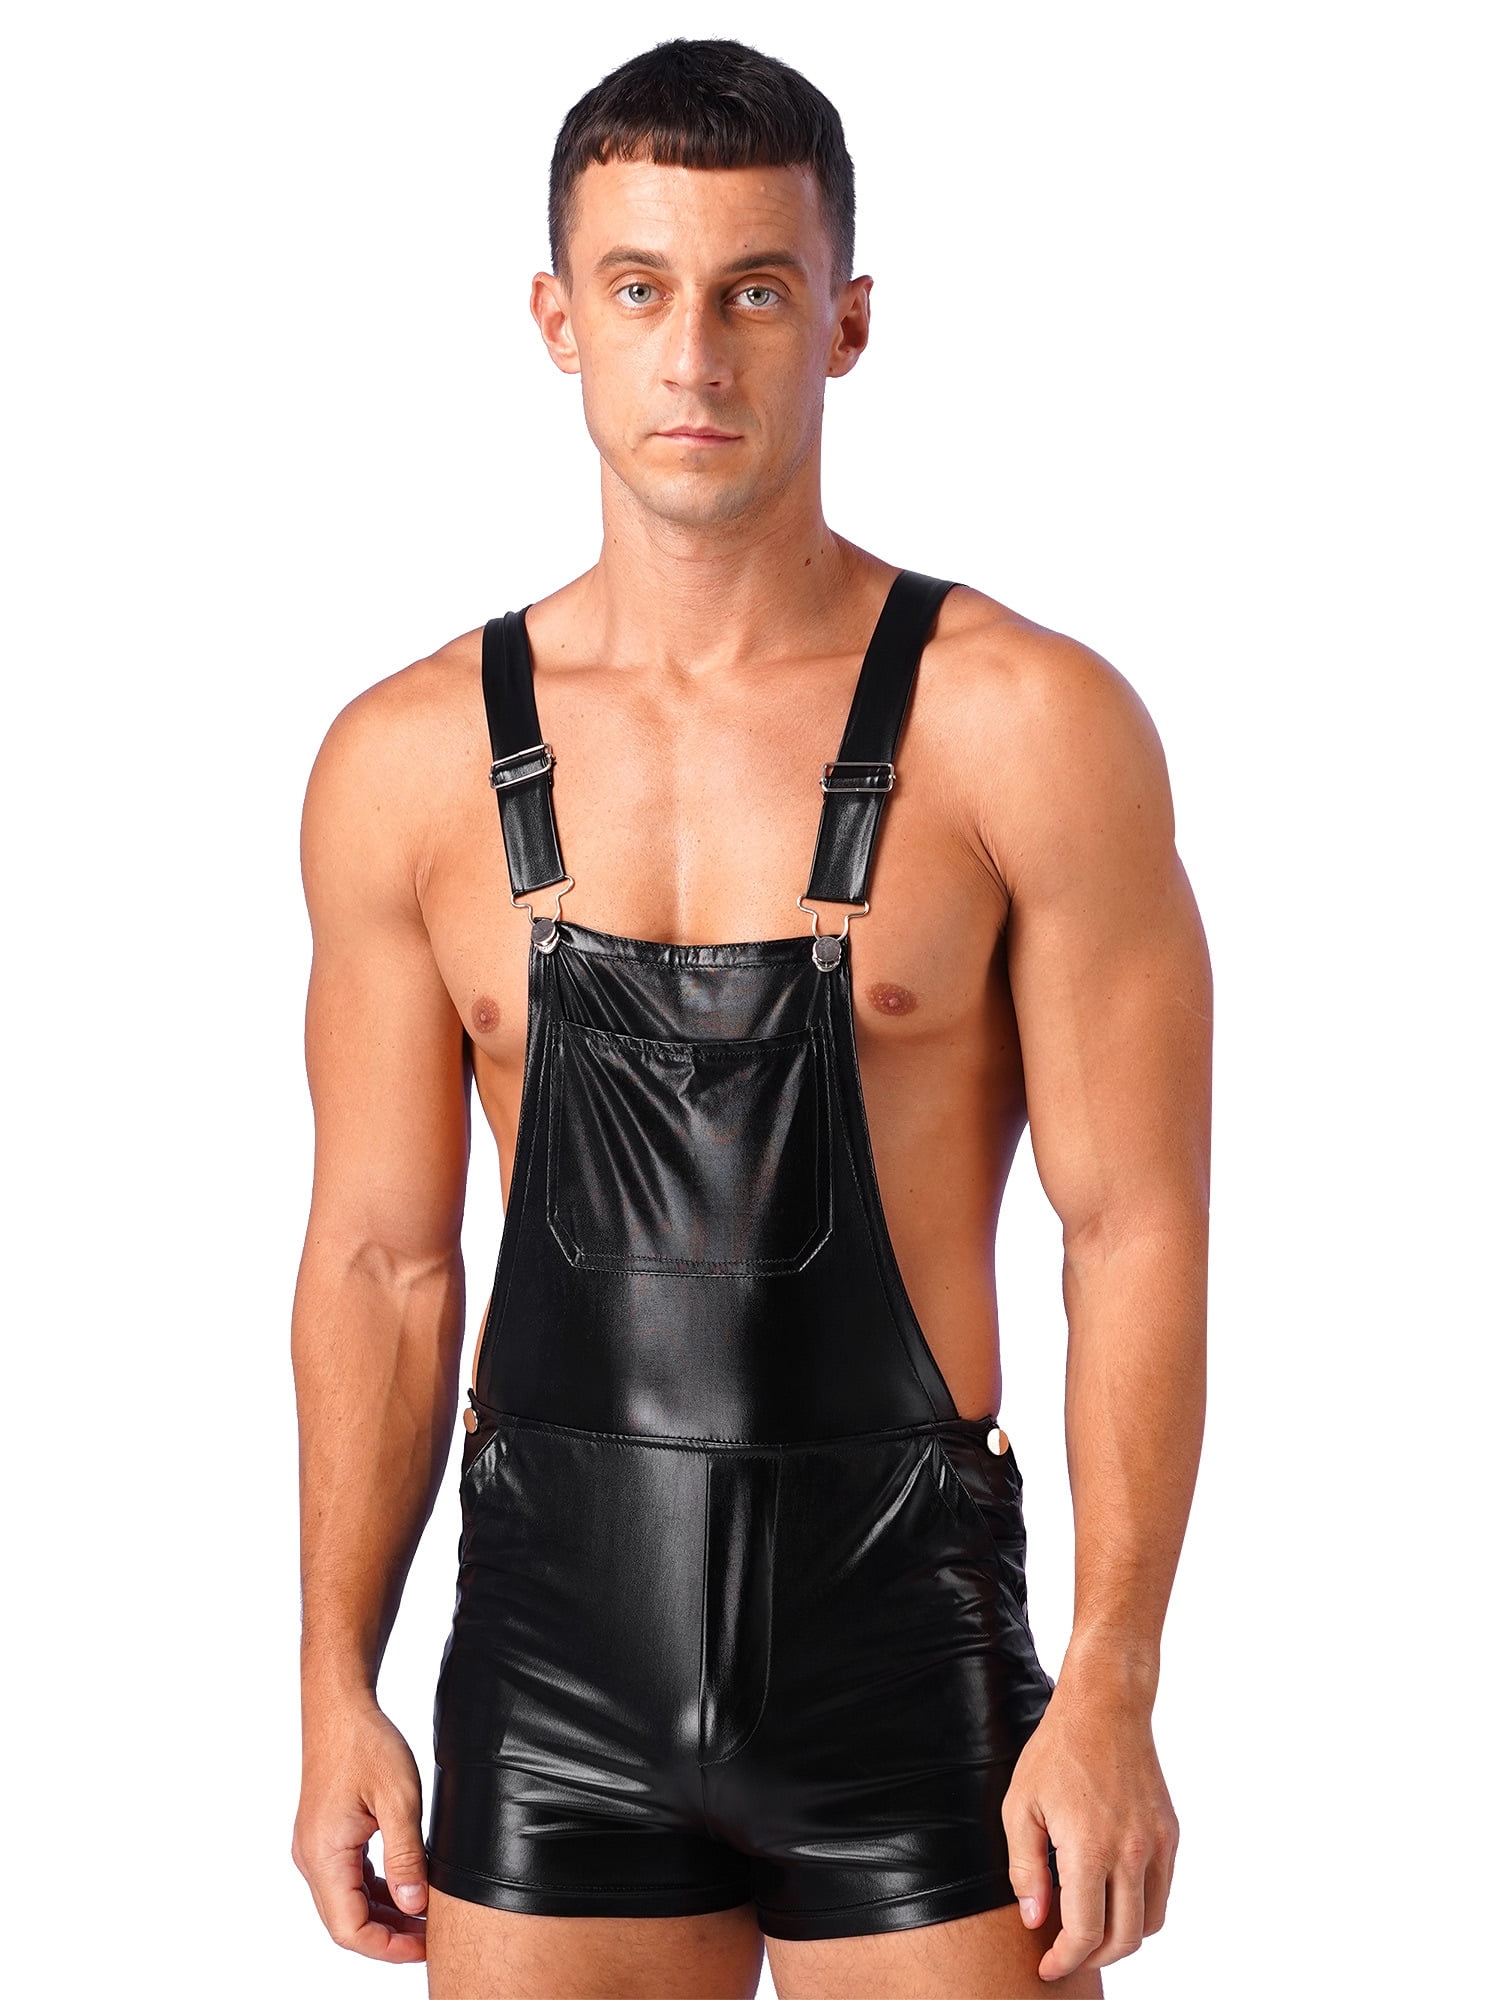 inhzoy Men's Metallic Dungarees Bib Overalls Suspender Shorts Party Club  Rave Outfits Black XL 